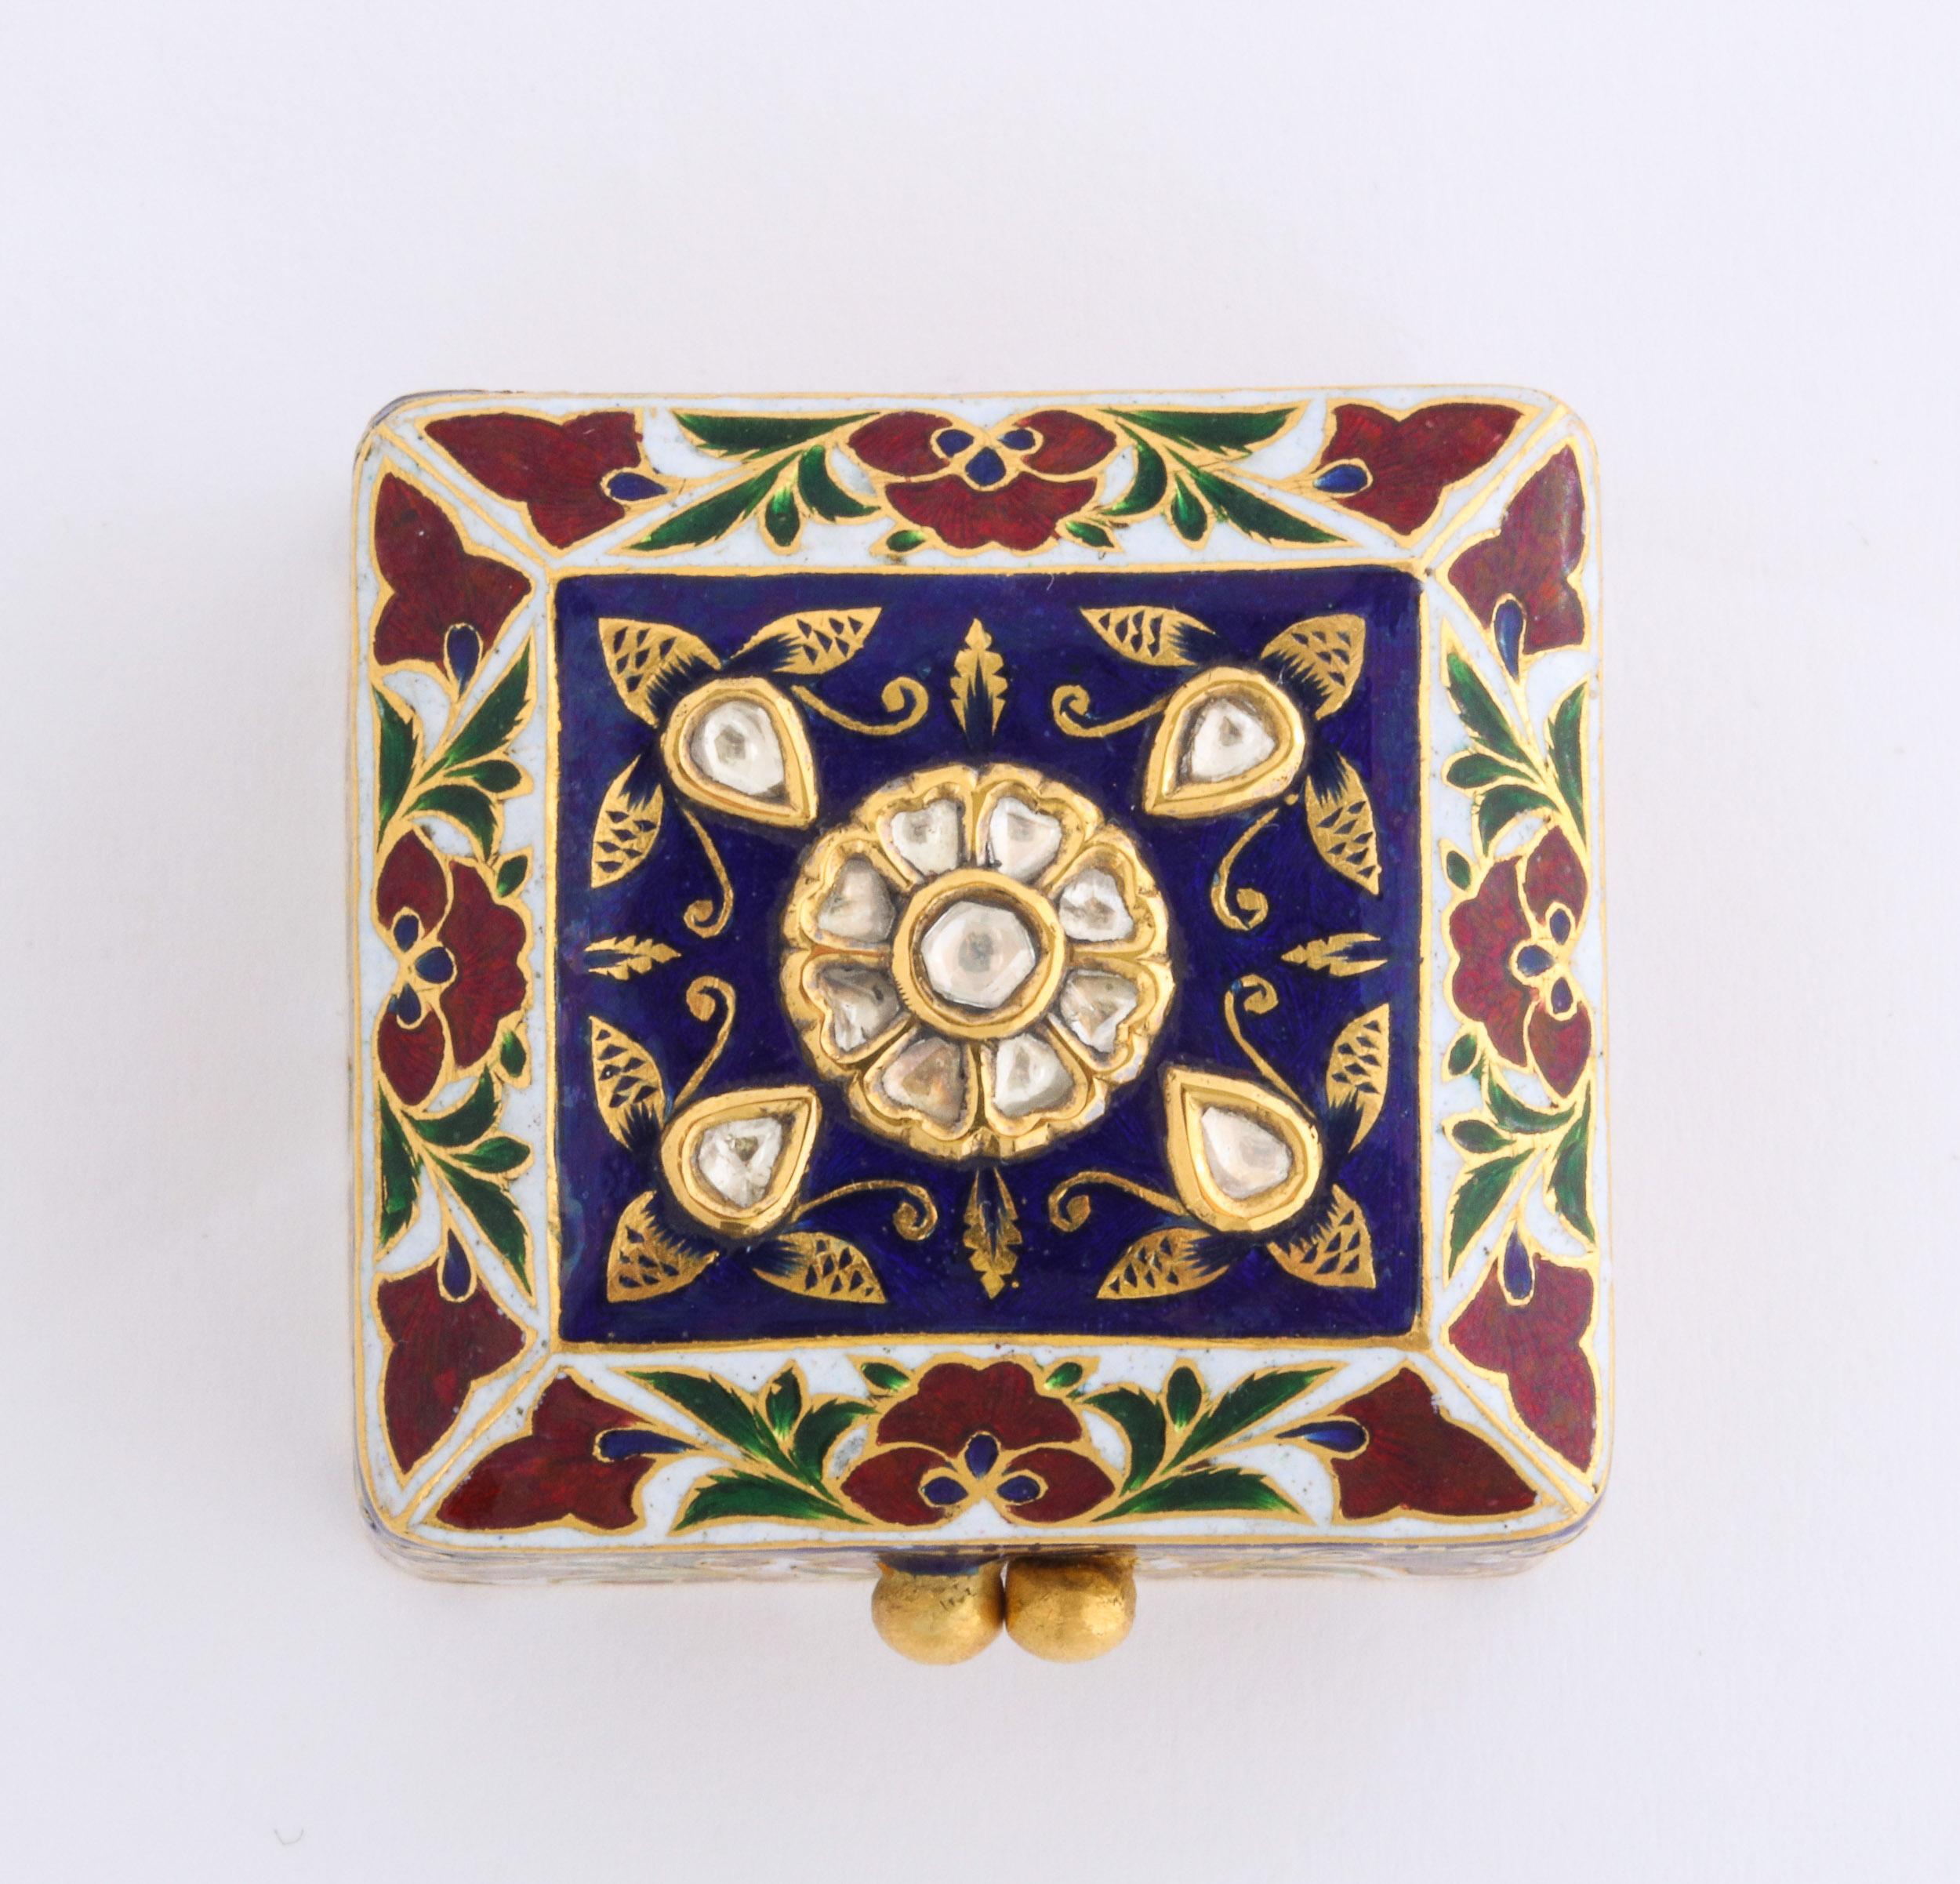 22-karat Indian gold enamel and diamonds pill snuff box, Mughal style, Jaipur.

Finely painted with flowers, set with rose-cut diamonds, the lid opens to hand painted enameled peacock.

Very high quality object. 

Weighs 42